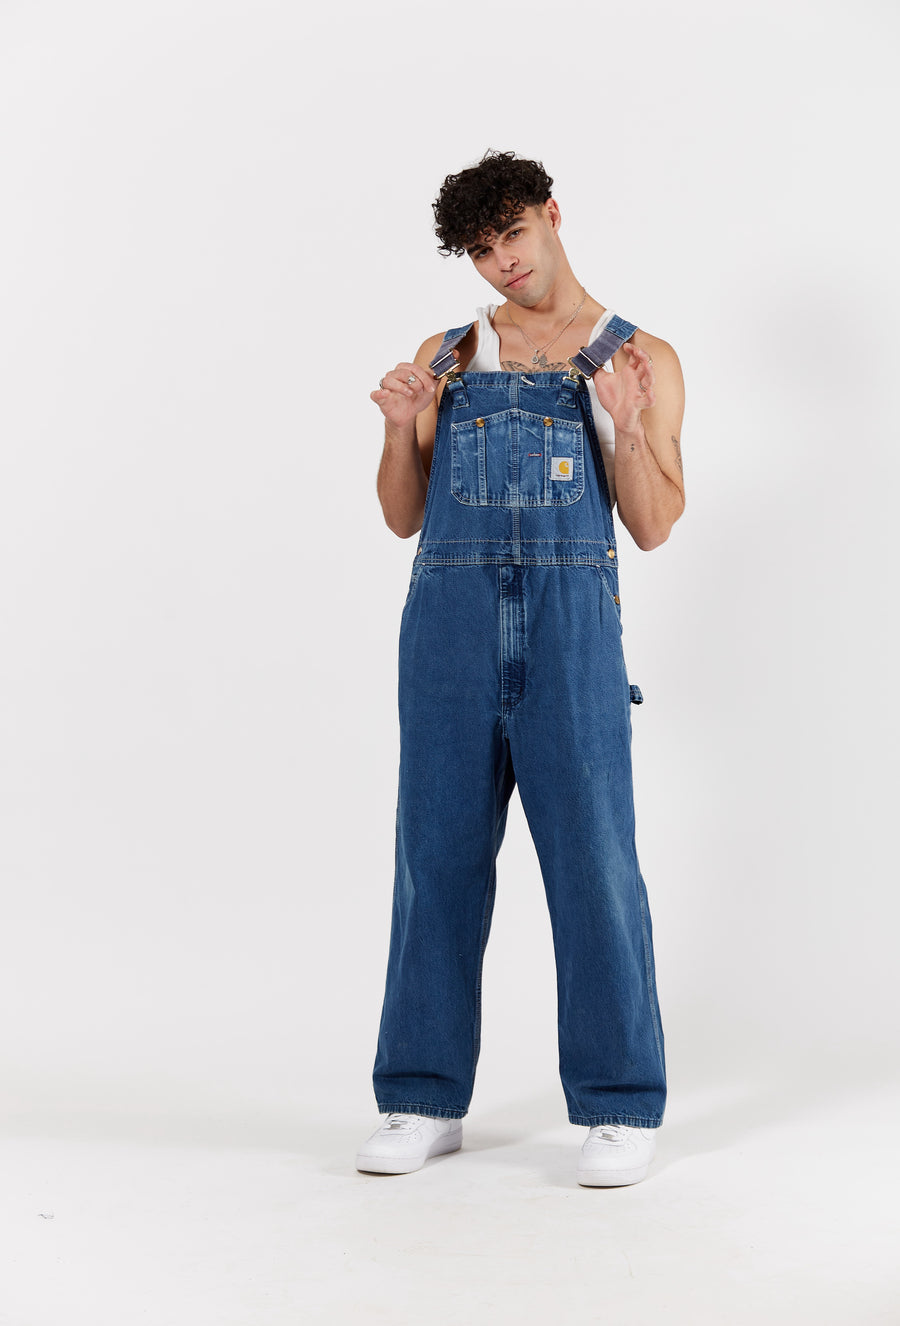 Carhartt Carpenter Denim Overalls in a vintage style from thrift store Twise Studio